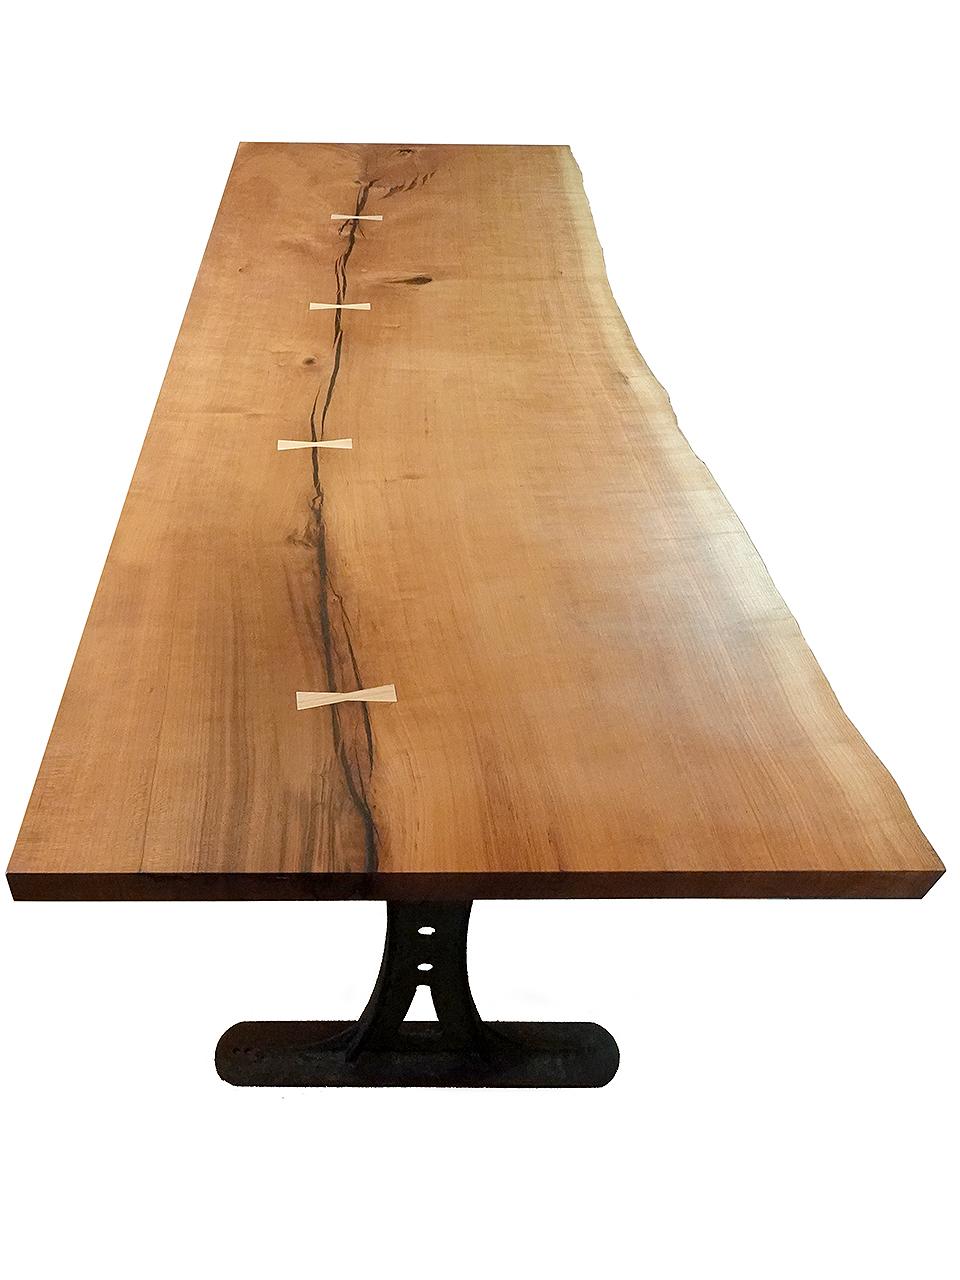 Mid-Century Modern Beautiful live Edge Cherry Desk - In The Manner of George Nakashima For Sale